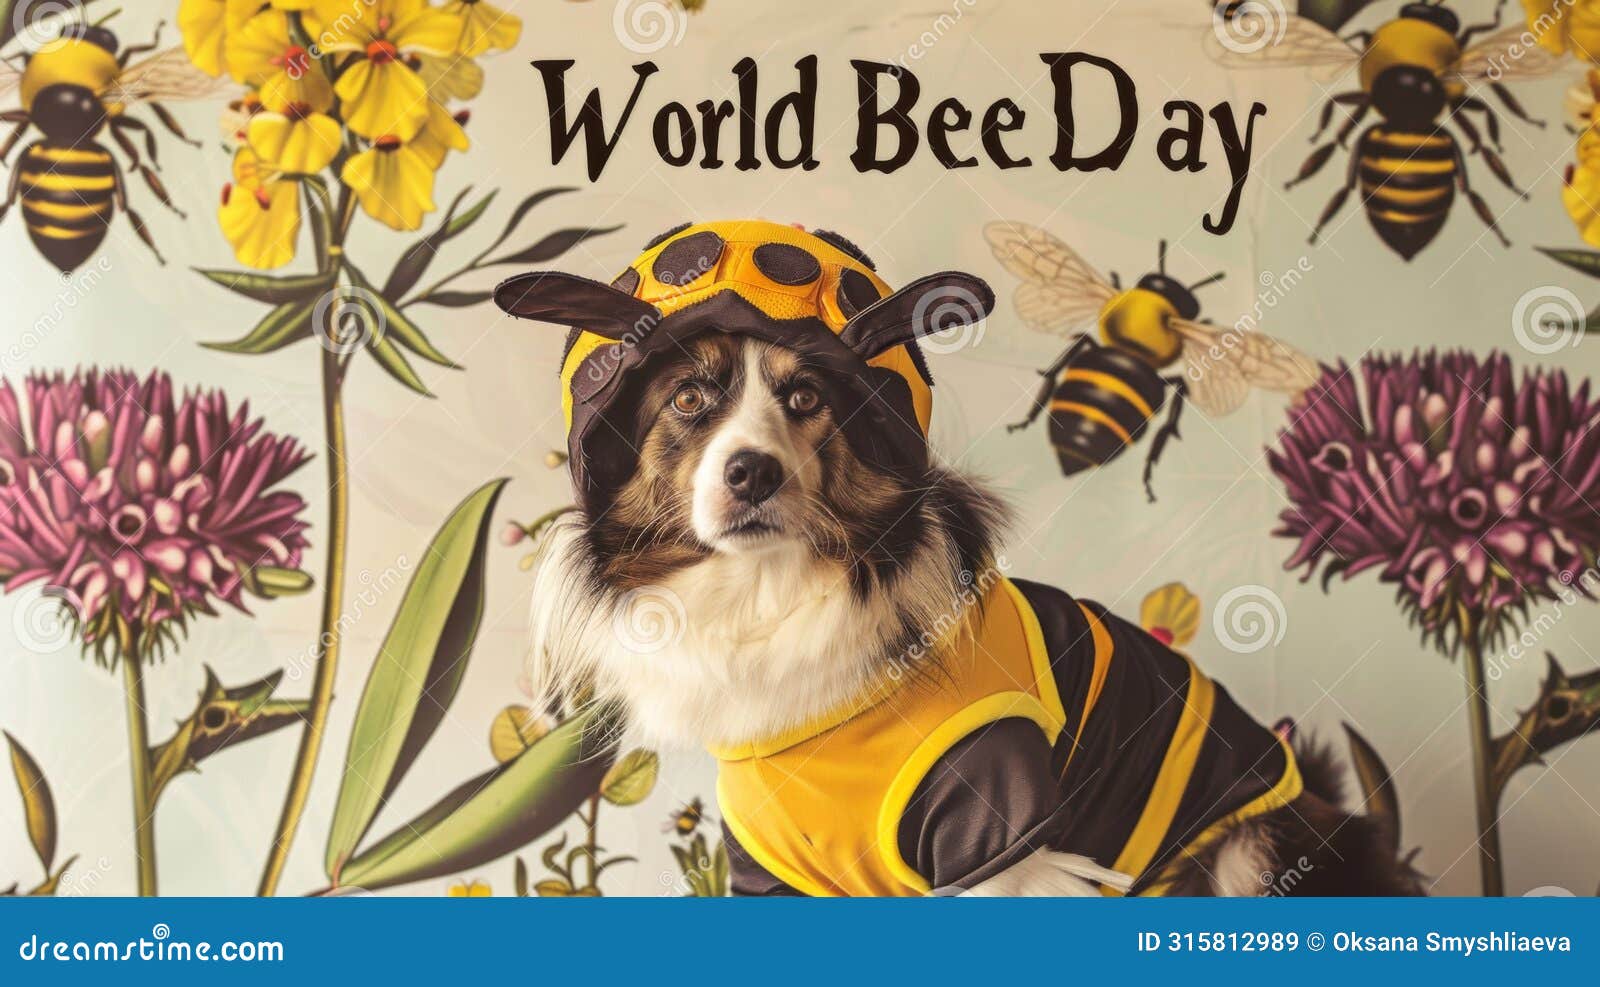 a devoted dog in a bee outfit pays homage to pollinators amidst illustrated blooms for world bee day